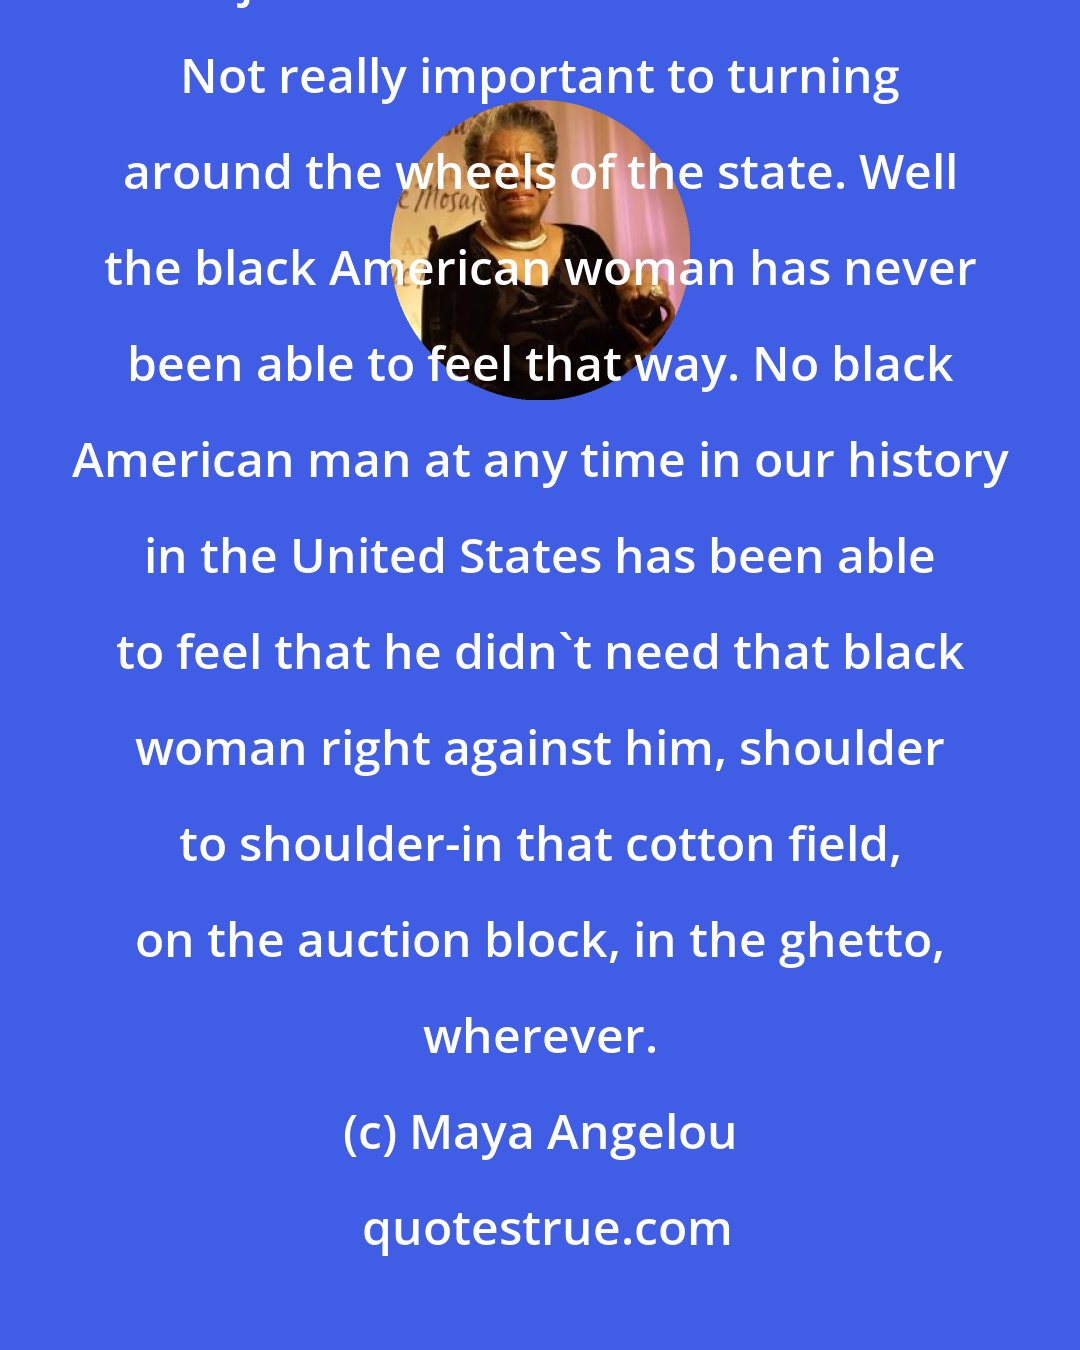 Maya Angelou: The white American man makes the white American woman maybe not superfluous but just a little kind of decoration. Not really important to turning around the wheels of the state. Well the black American woman has never been able to feel that way. No black American man at any time in our history in the United States has been able to feel that he didn't need that black woman right against him, shoulder to shoulder-in that cotton field, on the auction block, in the ghetto, wherever.